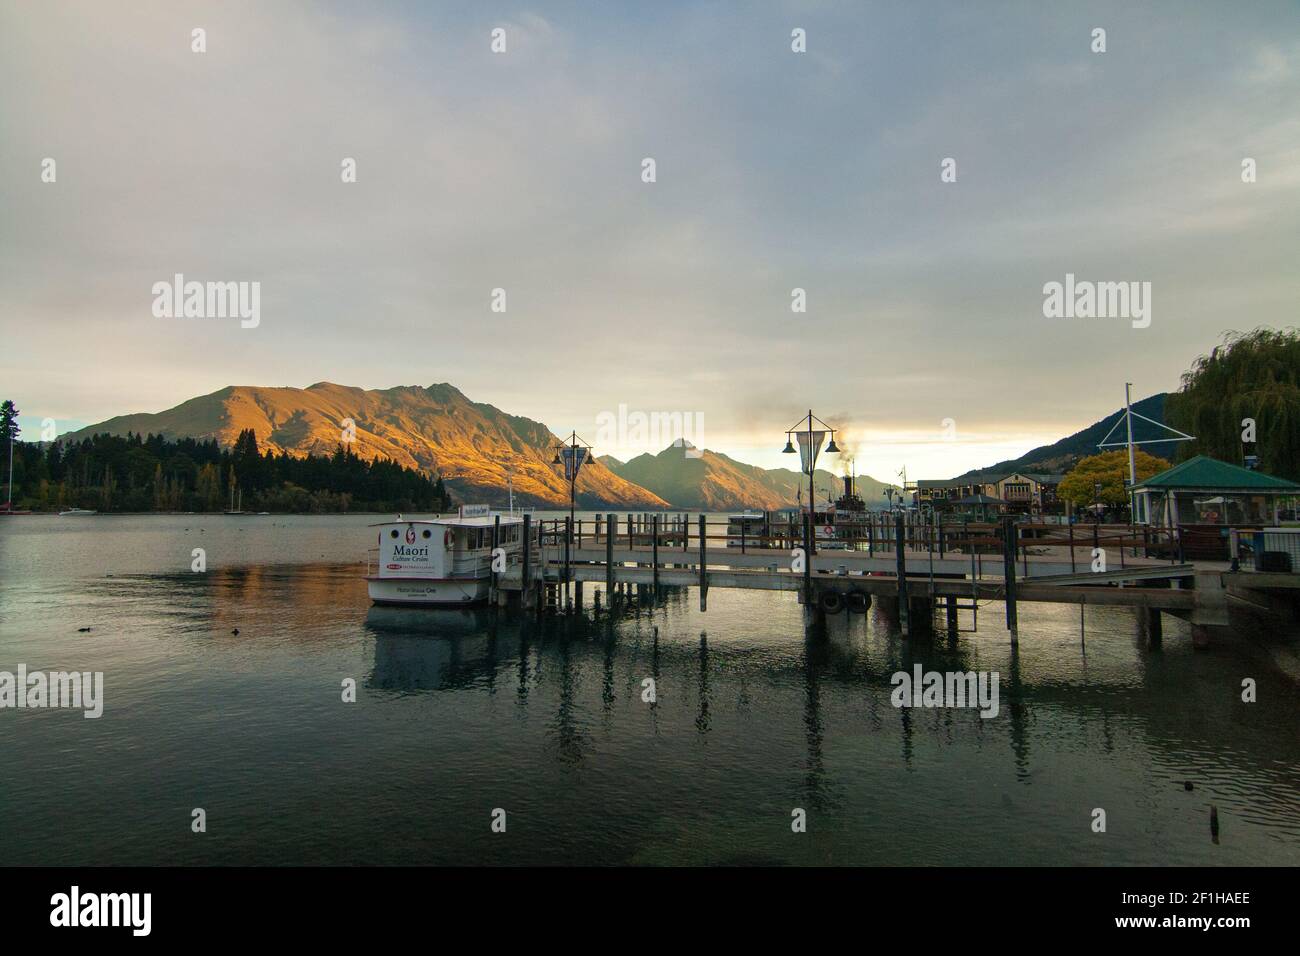 Queenstown Wharf and Harbour View of Lake Wakatipu and Mountain Peaks at Sunset Lights on the background, New Zealand, South Island Banque D'Images